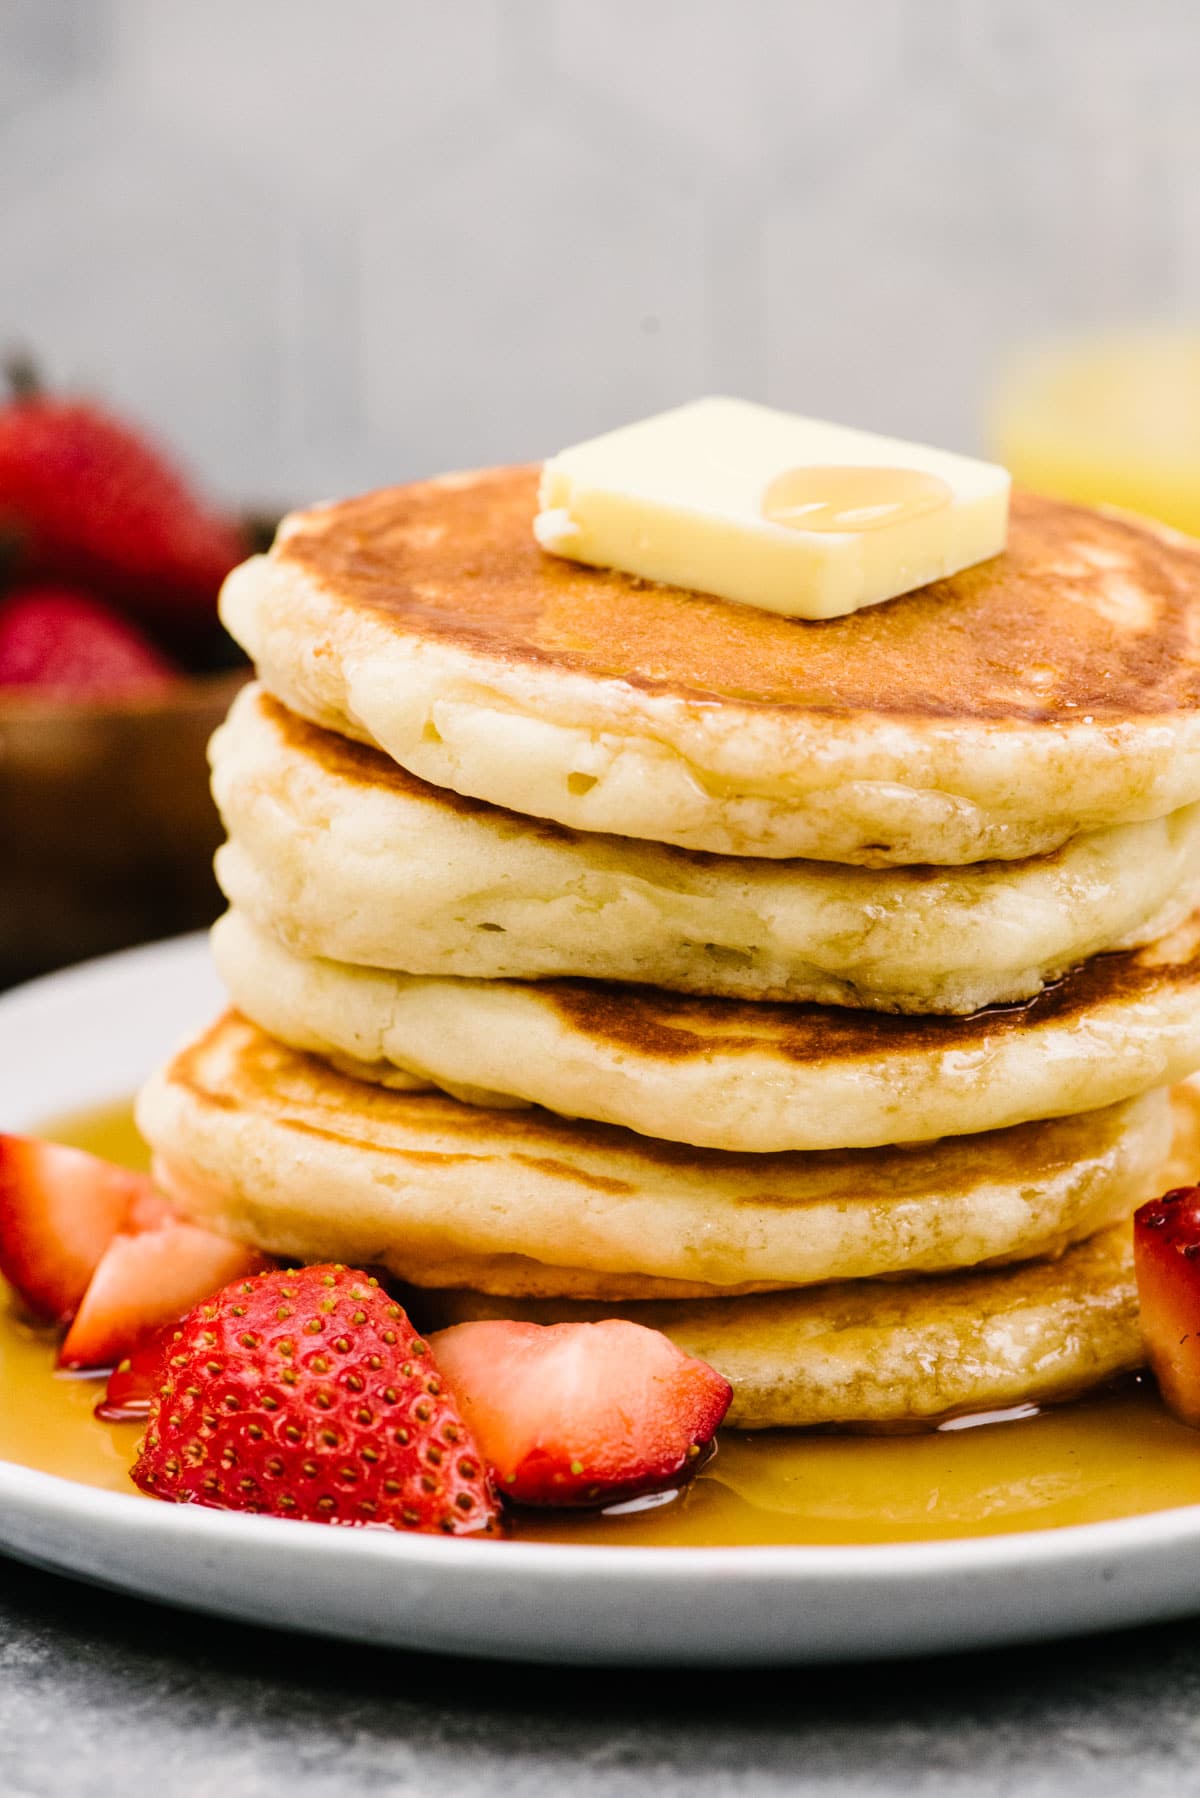 Side view, a stack of homemade pancakes on a white plate topped with butter, drizzled with maple syrup, and garnished with fresh strawberries.